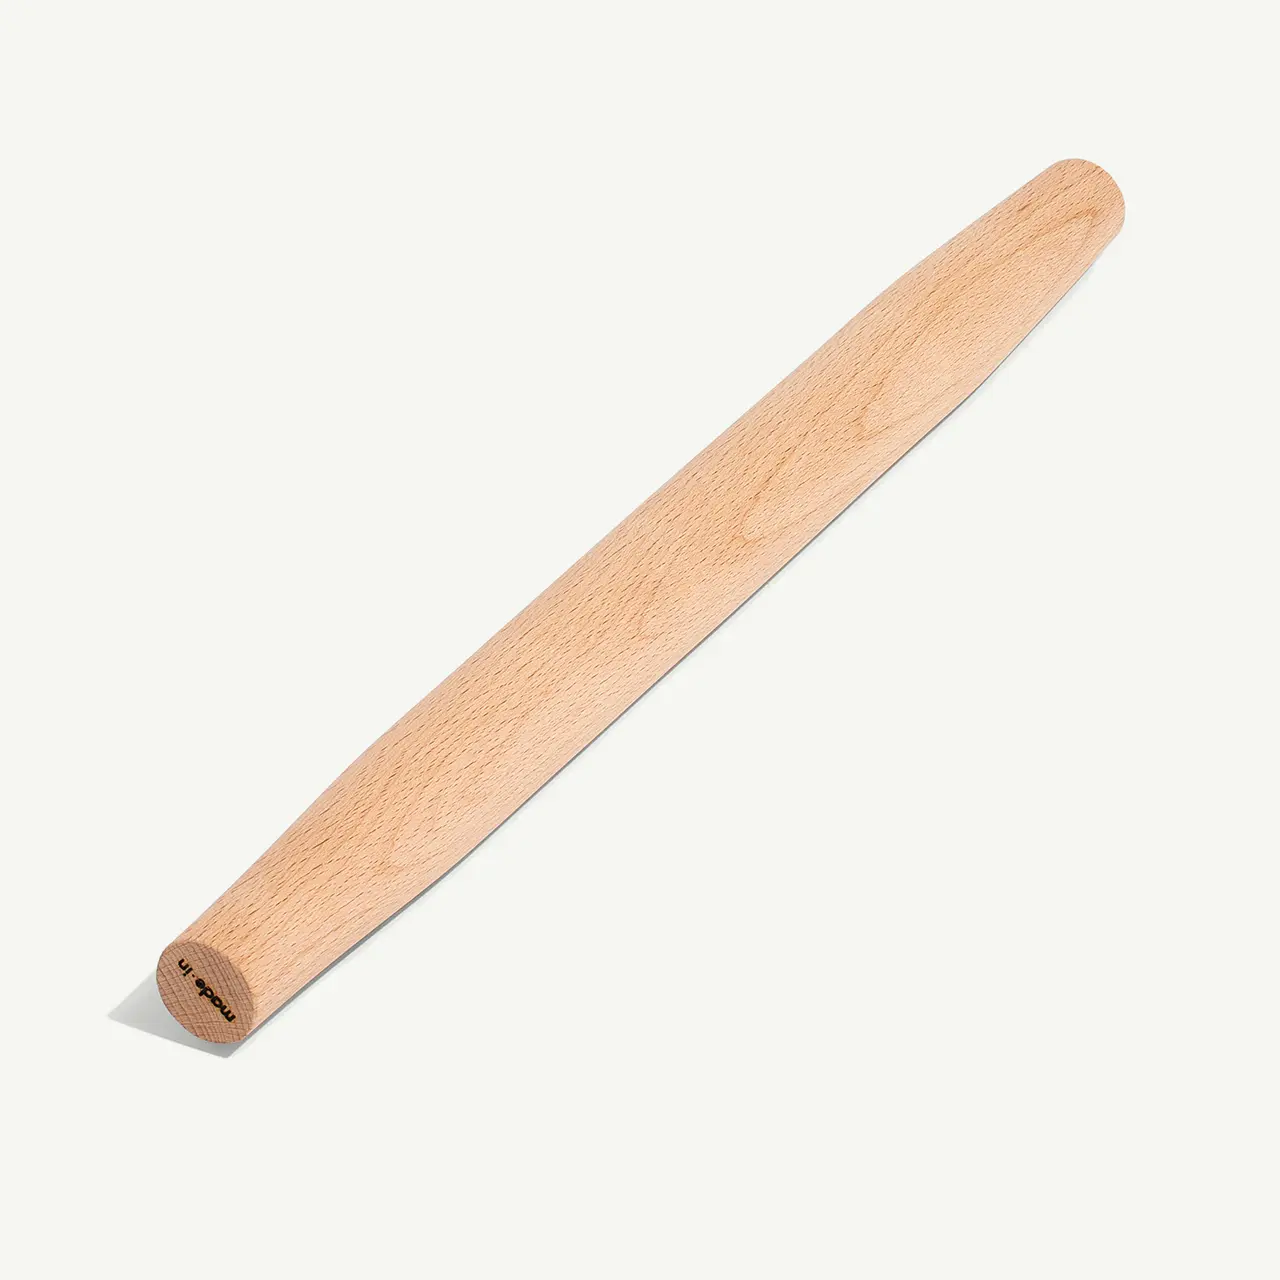 A wooden tongue depressor is displayed against a plain light background.